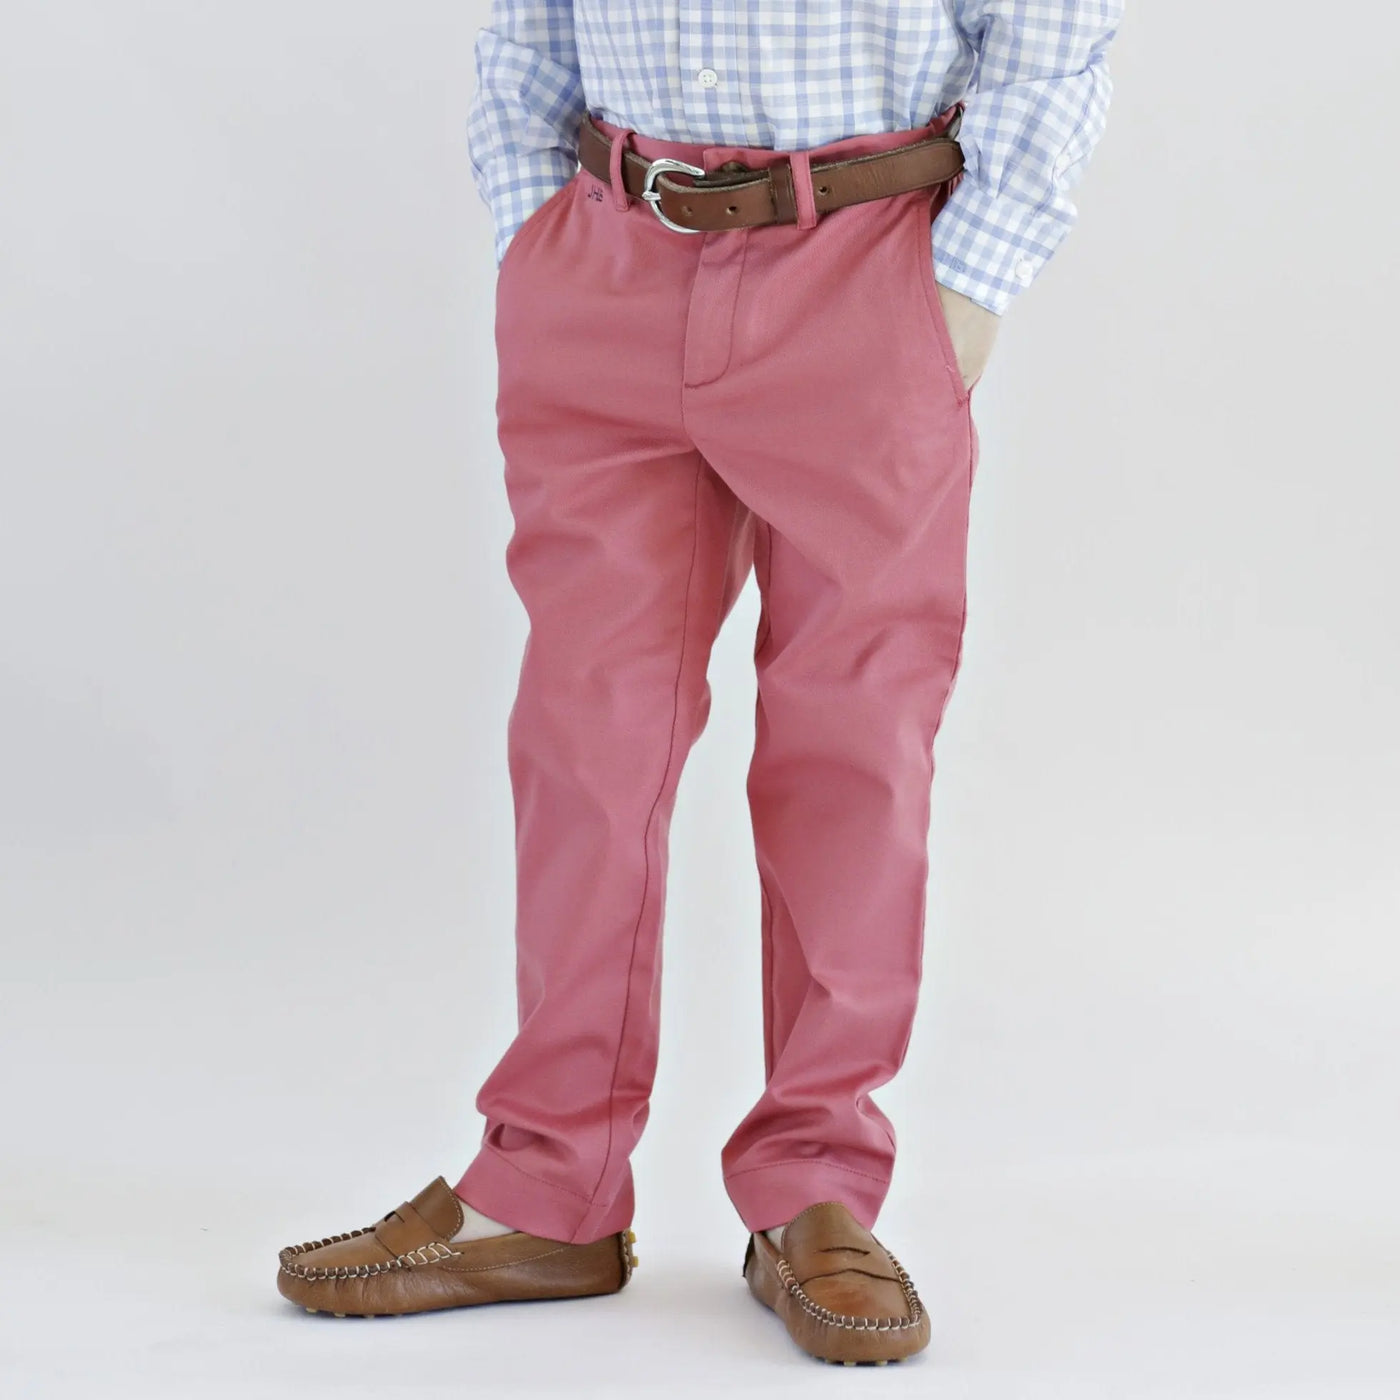 Palmetto Pants  Revolutionary Red Brown Bowen & Co.